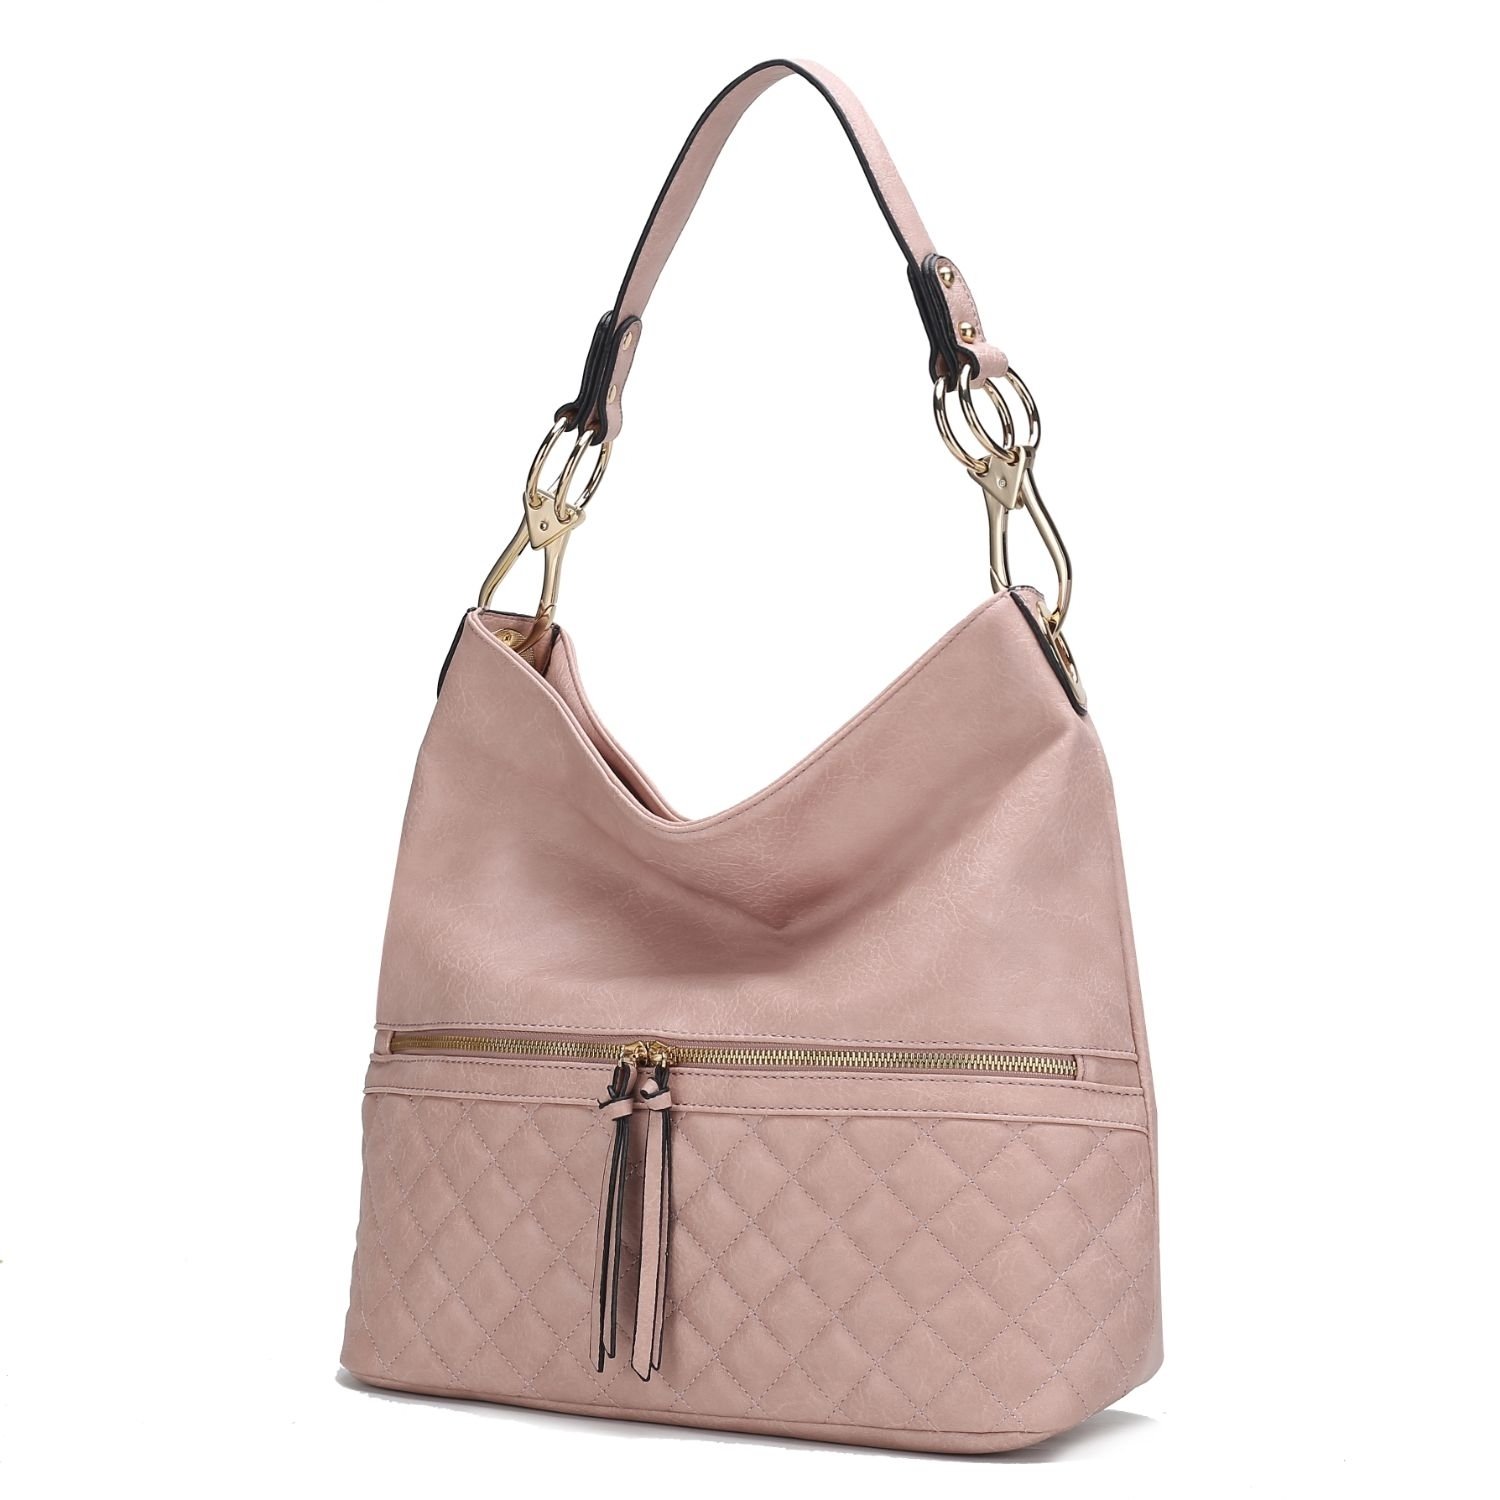 MKF Collection Dalila Vegan Leather Women's Shoulder Bag By Mia K. - Dusty Rose